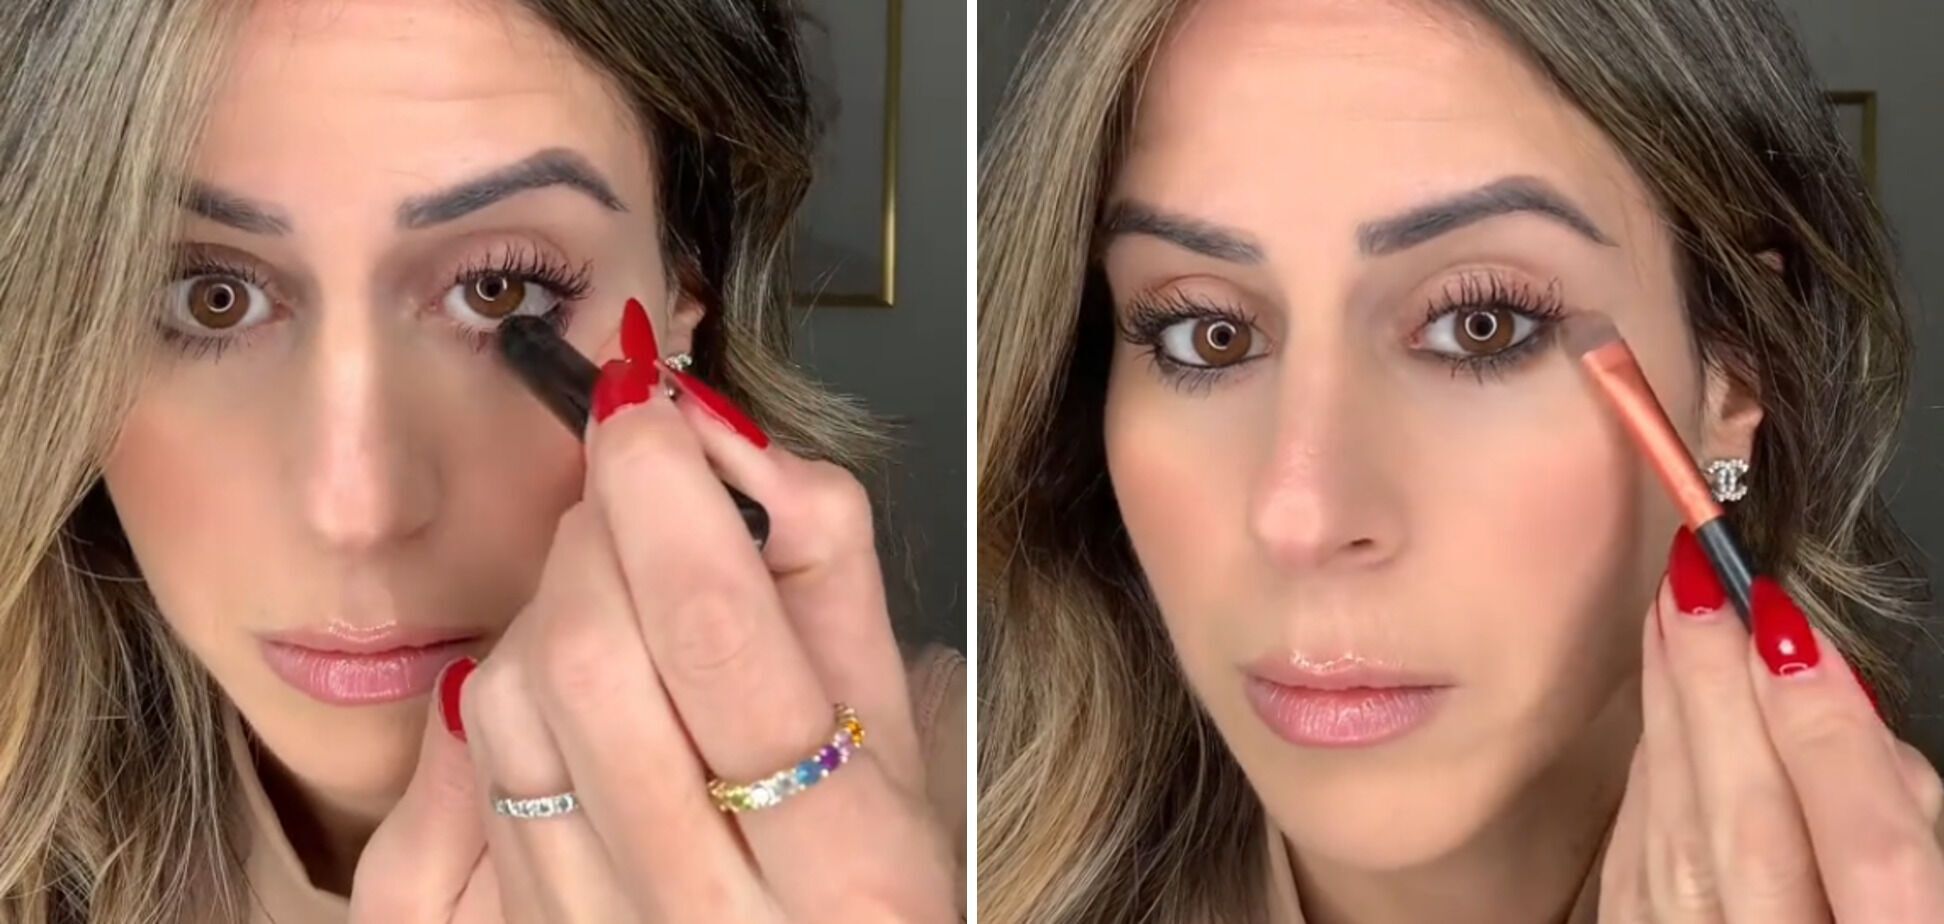 Three makeup life hacks to make every girl more attractive: what's the secret?